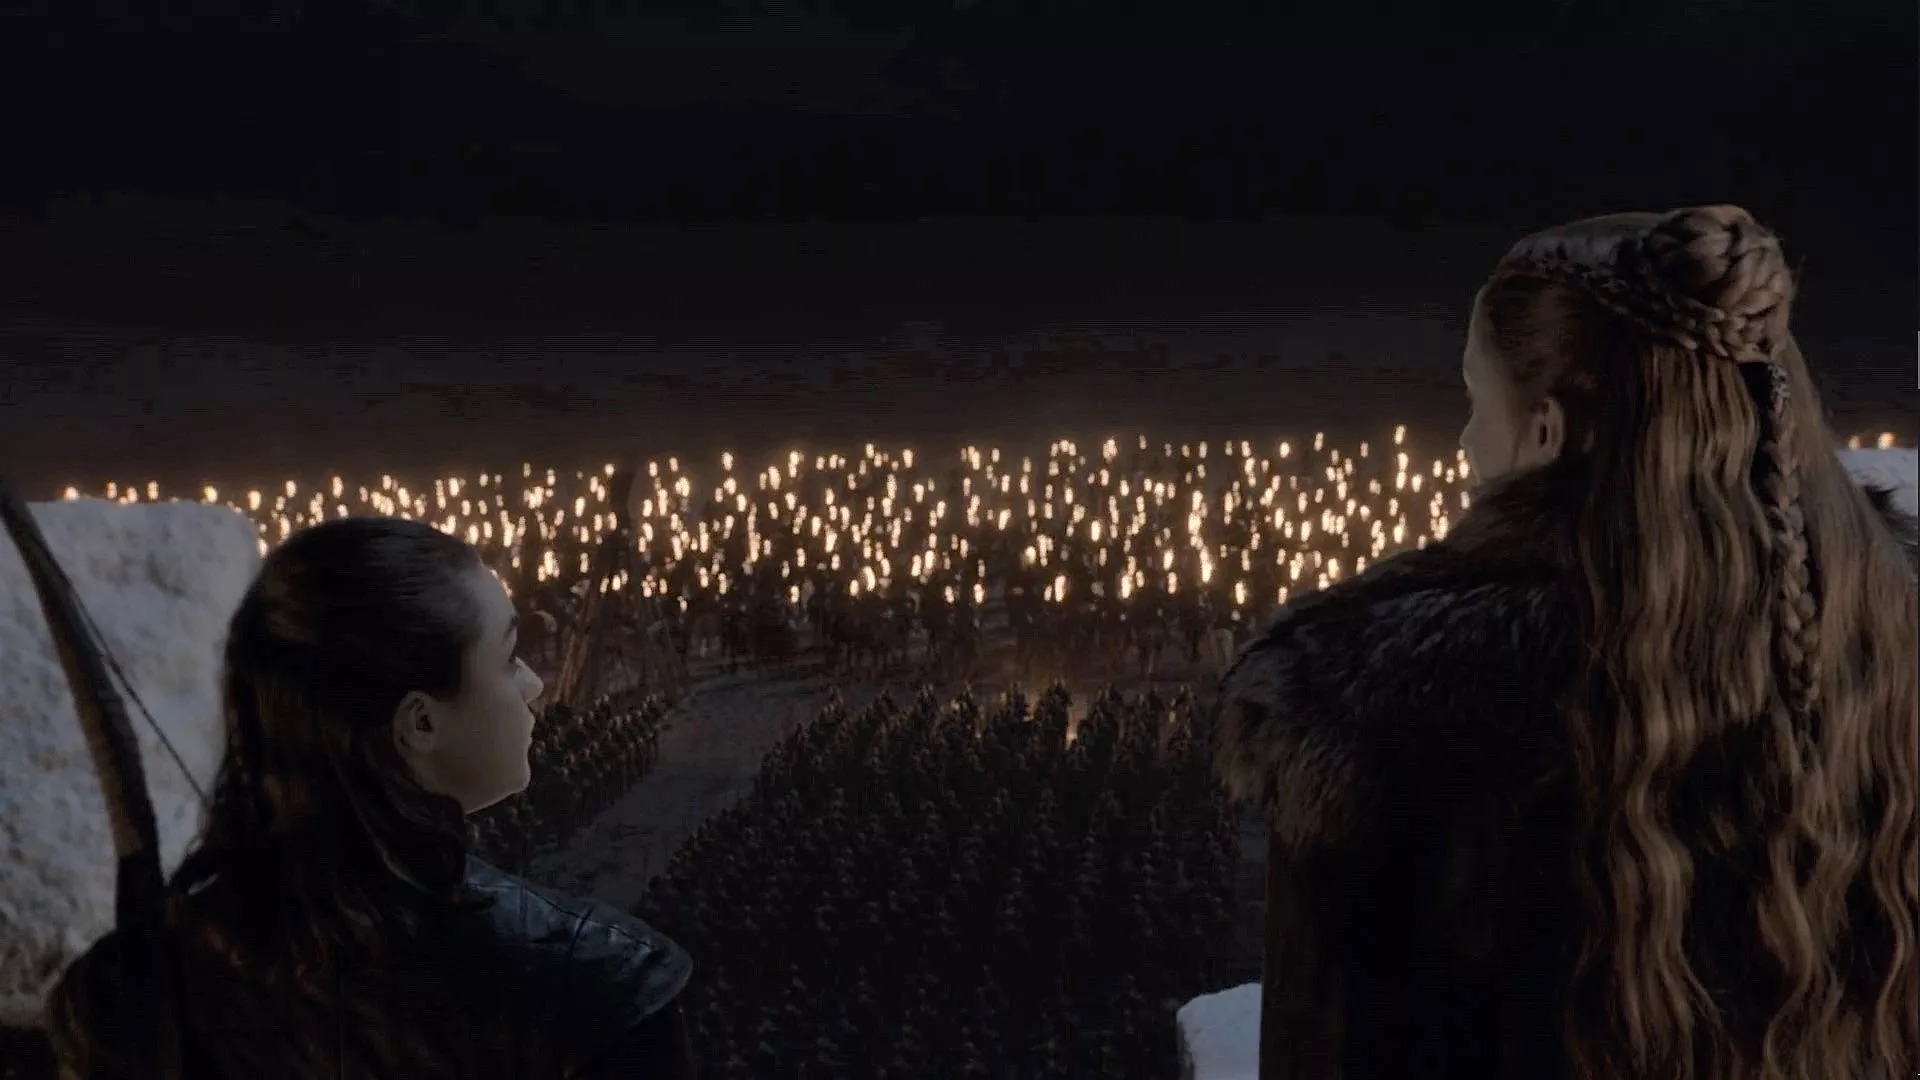 Arya Stark (Maisie Williams) and Sansa Stark (Sophie Turner) overlook the Dothraki and Unsullied armies before the Battle of Winterfell in "the Long Night"